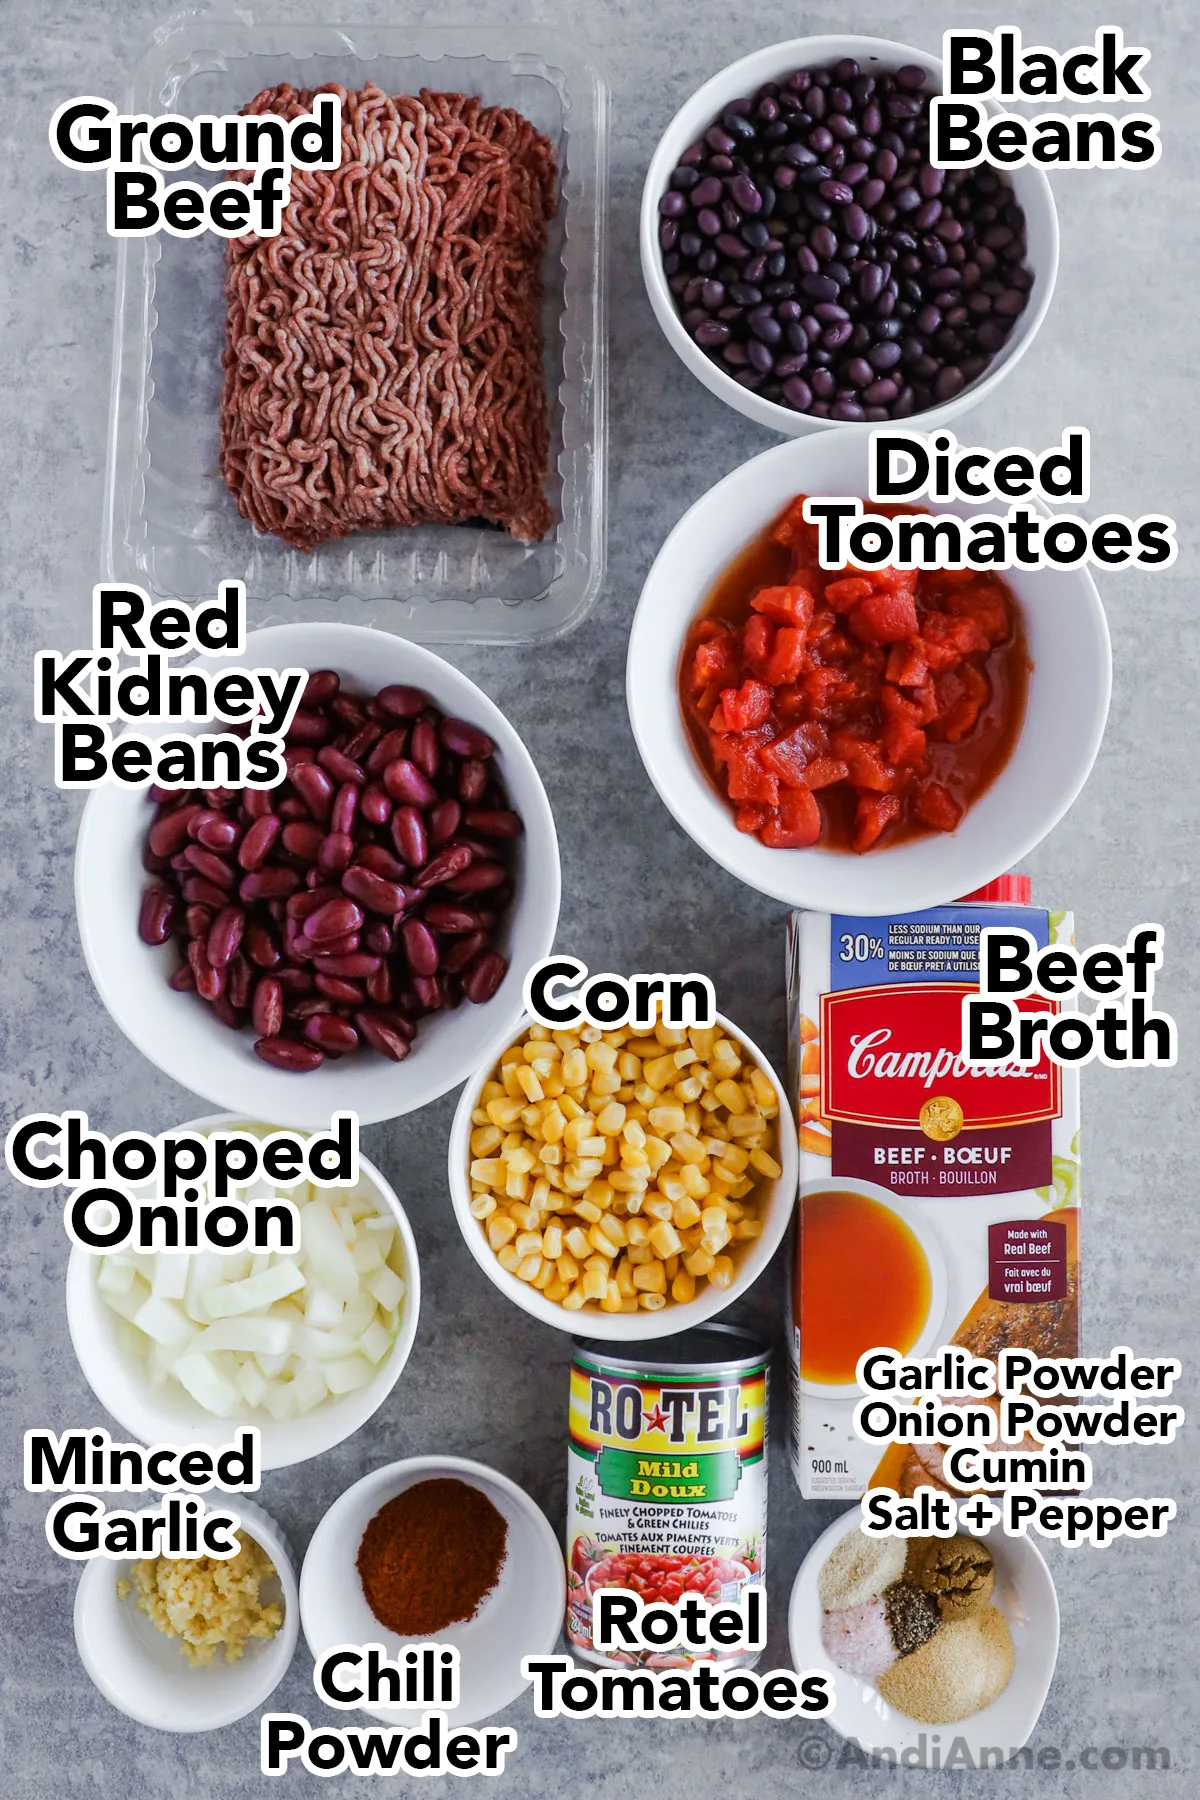 Recipe ingredients in containers including raw ground beef, bowls of black beans, kidney beans, diced tomatoes, corn, broth, onion and spices.